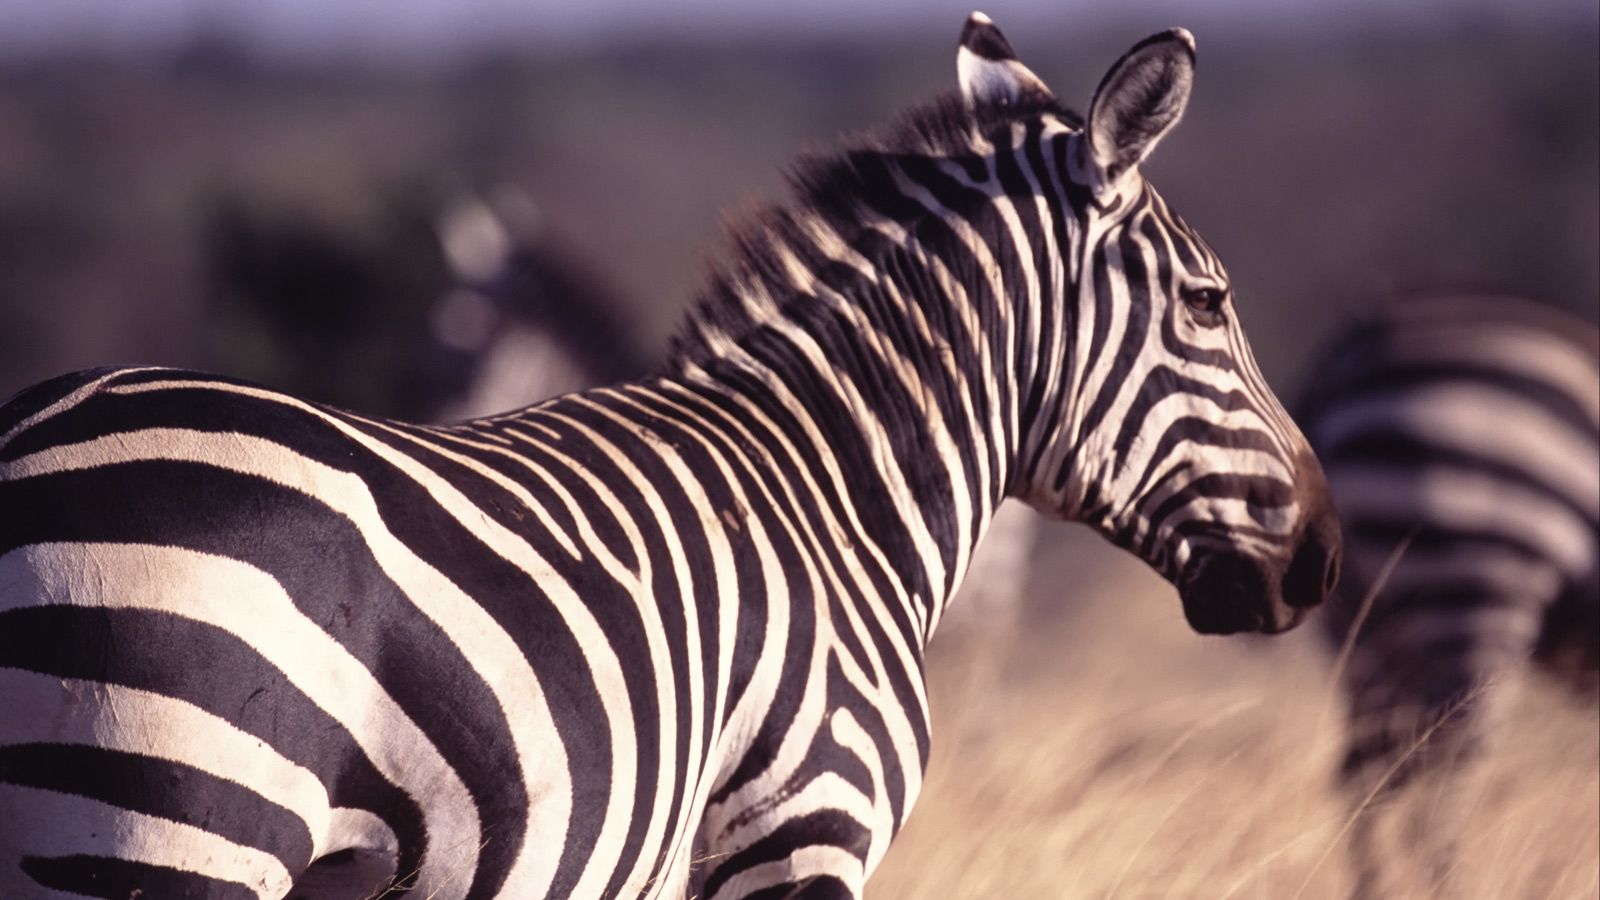 A zoo is accused of painting a donkey and passing it off as a zebra | CNN